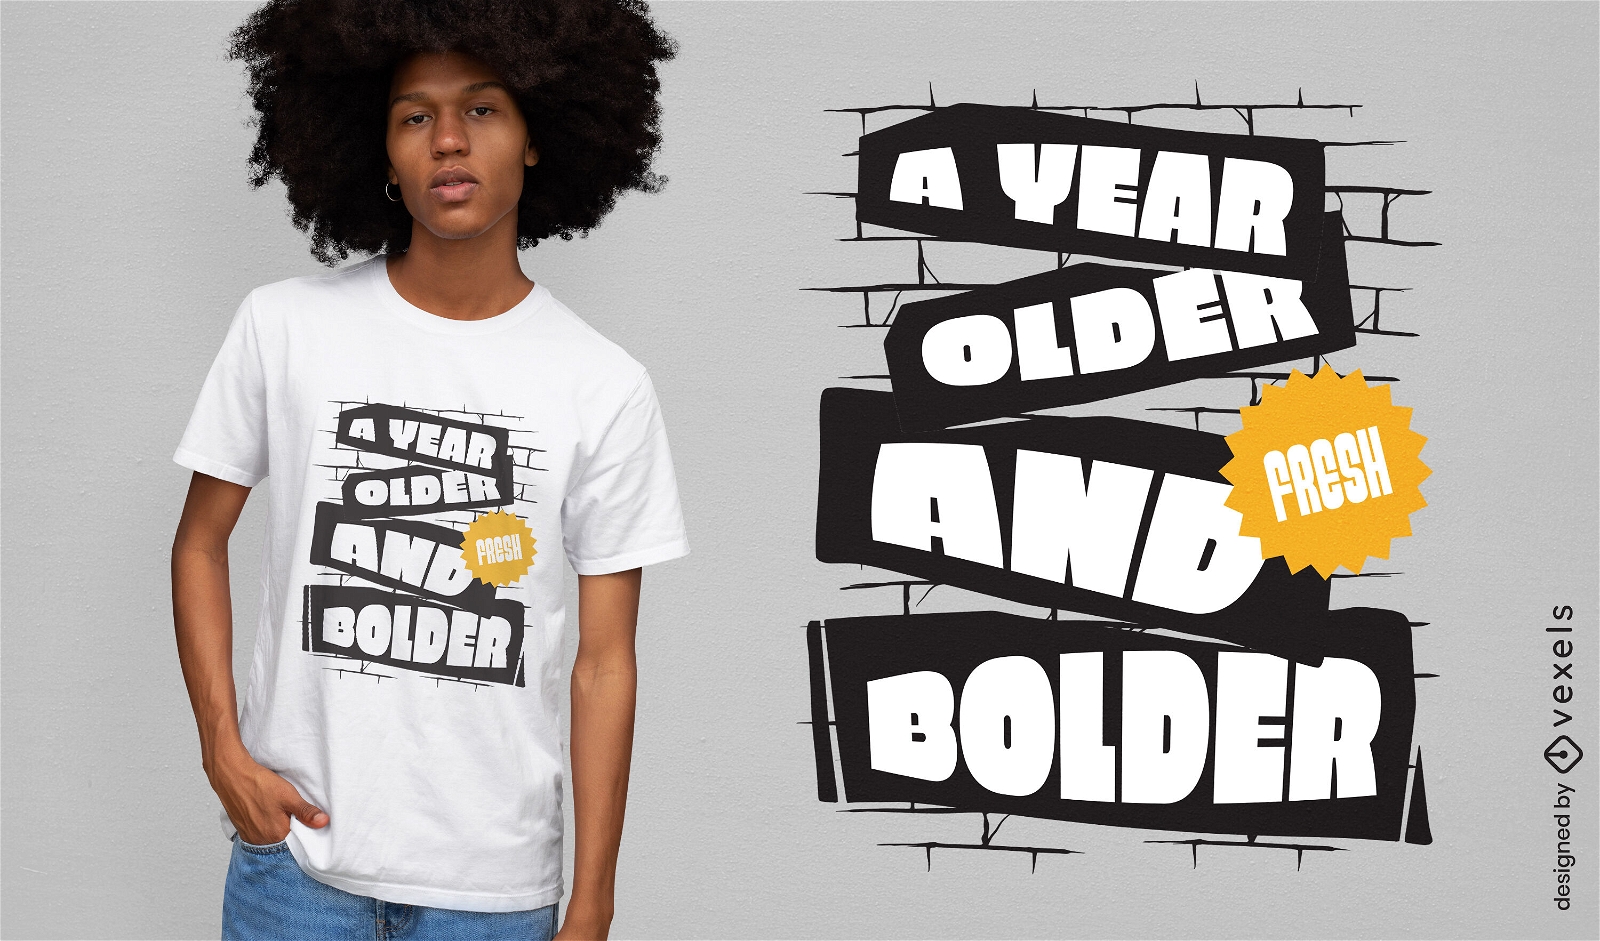 Funny older and bolder birthday quote t-shirt design